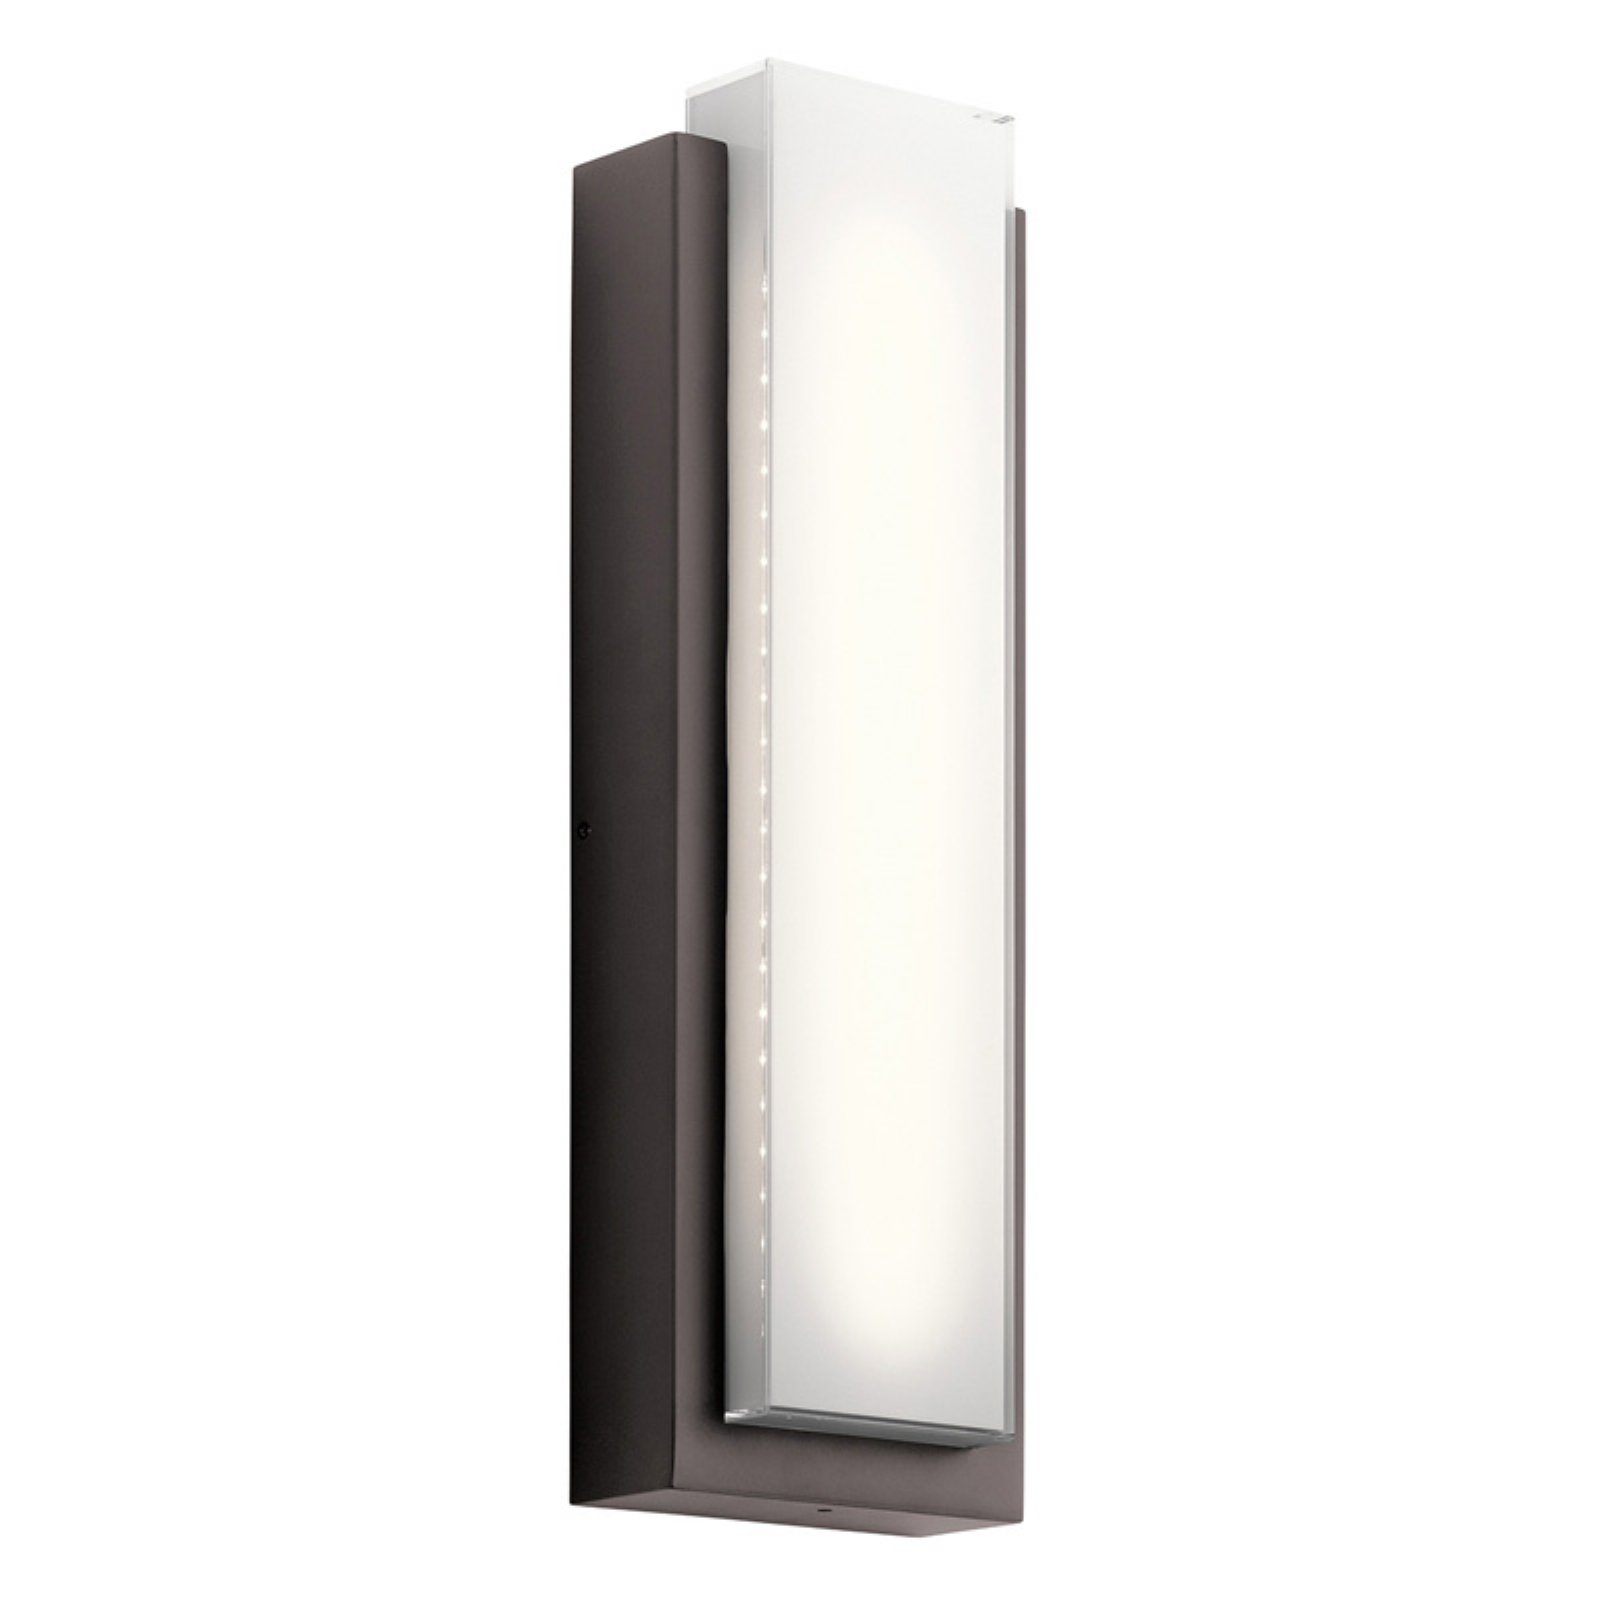 Kichler 49557Led Dahlia Light 19" Tall Led Outdoor Wall Sconce - image 2 of 4